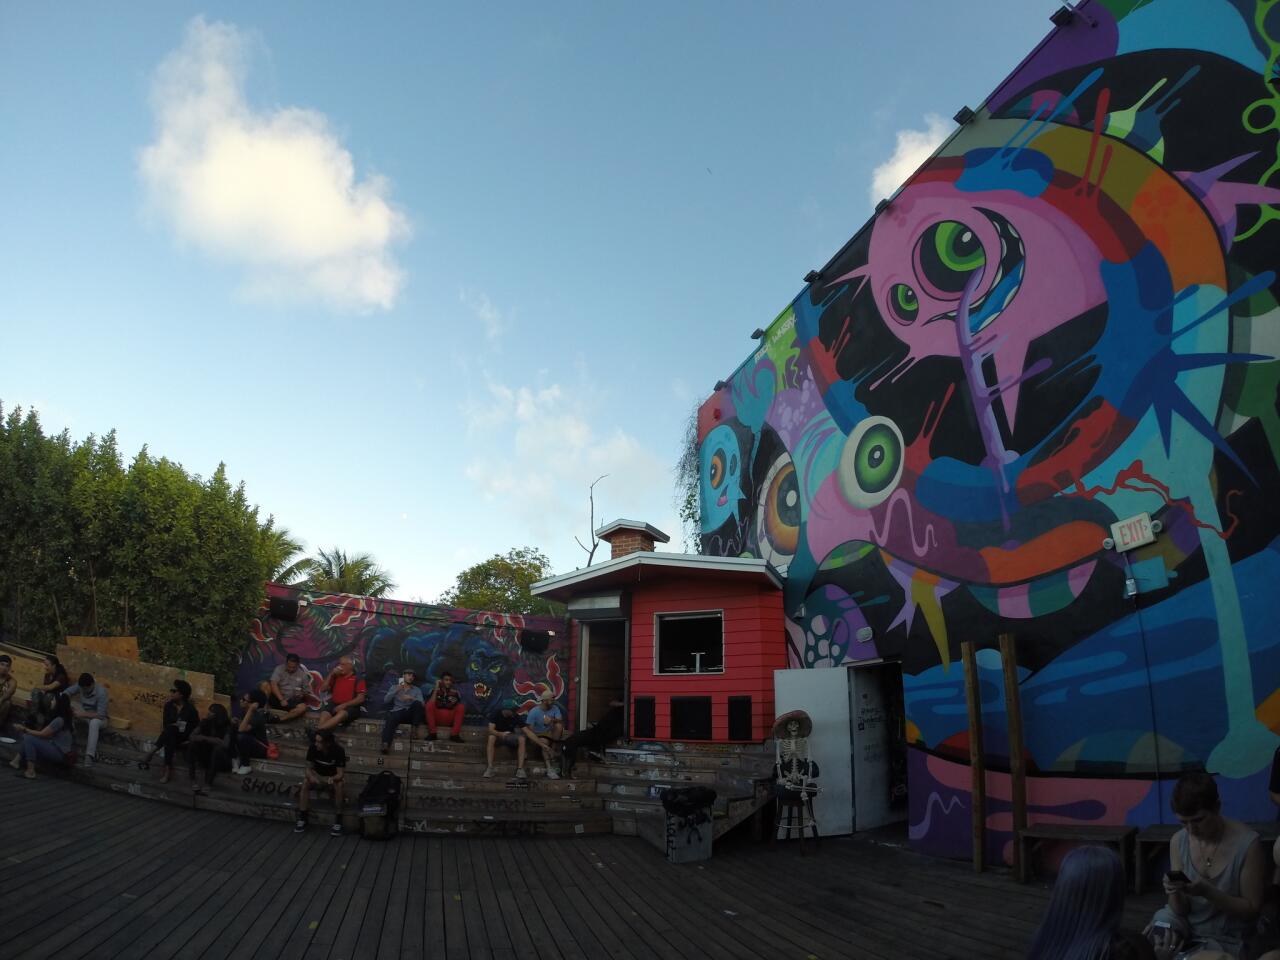 Pictures: Wynwood street art district in Miami